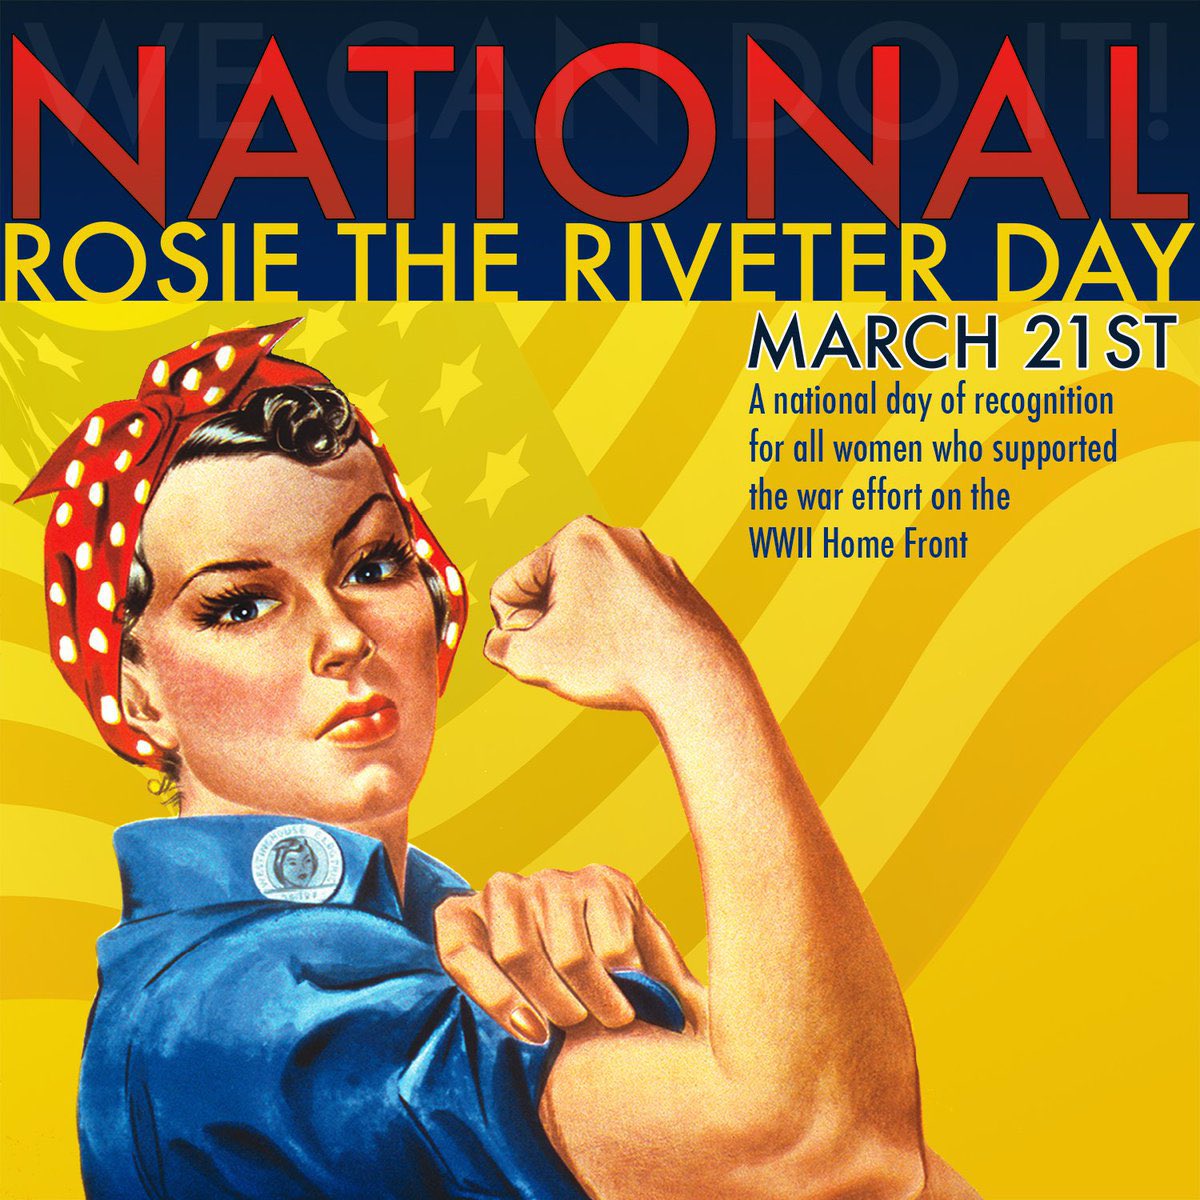 Rosie the Riveter Day. Honoring the legacy of women w/continued equity in nontraditional jobs, in their homes and communities. Women’s history is OUR history. Proud to be a female leader and grow others to continue to learn and jump in! 💪🏽💋🇺🇸
#rosietheriveterday
#sheleadsk12